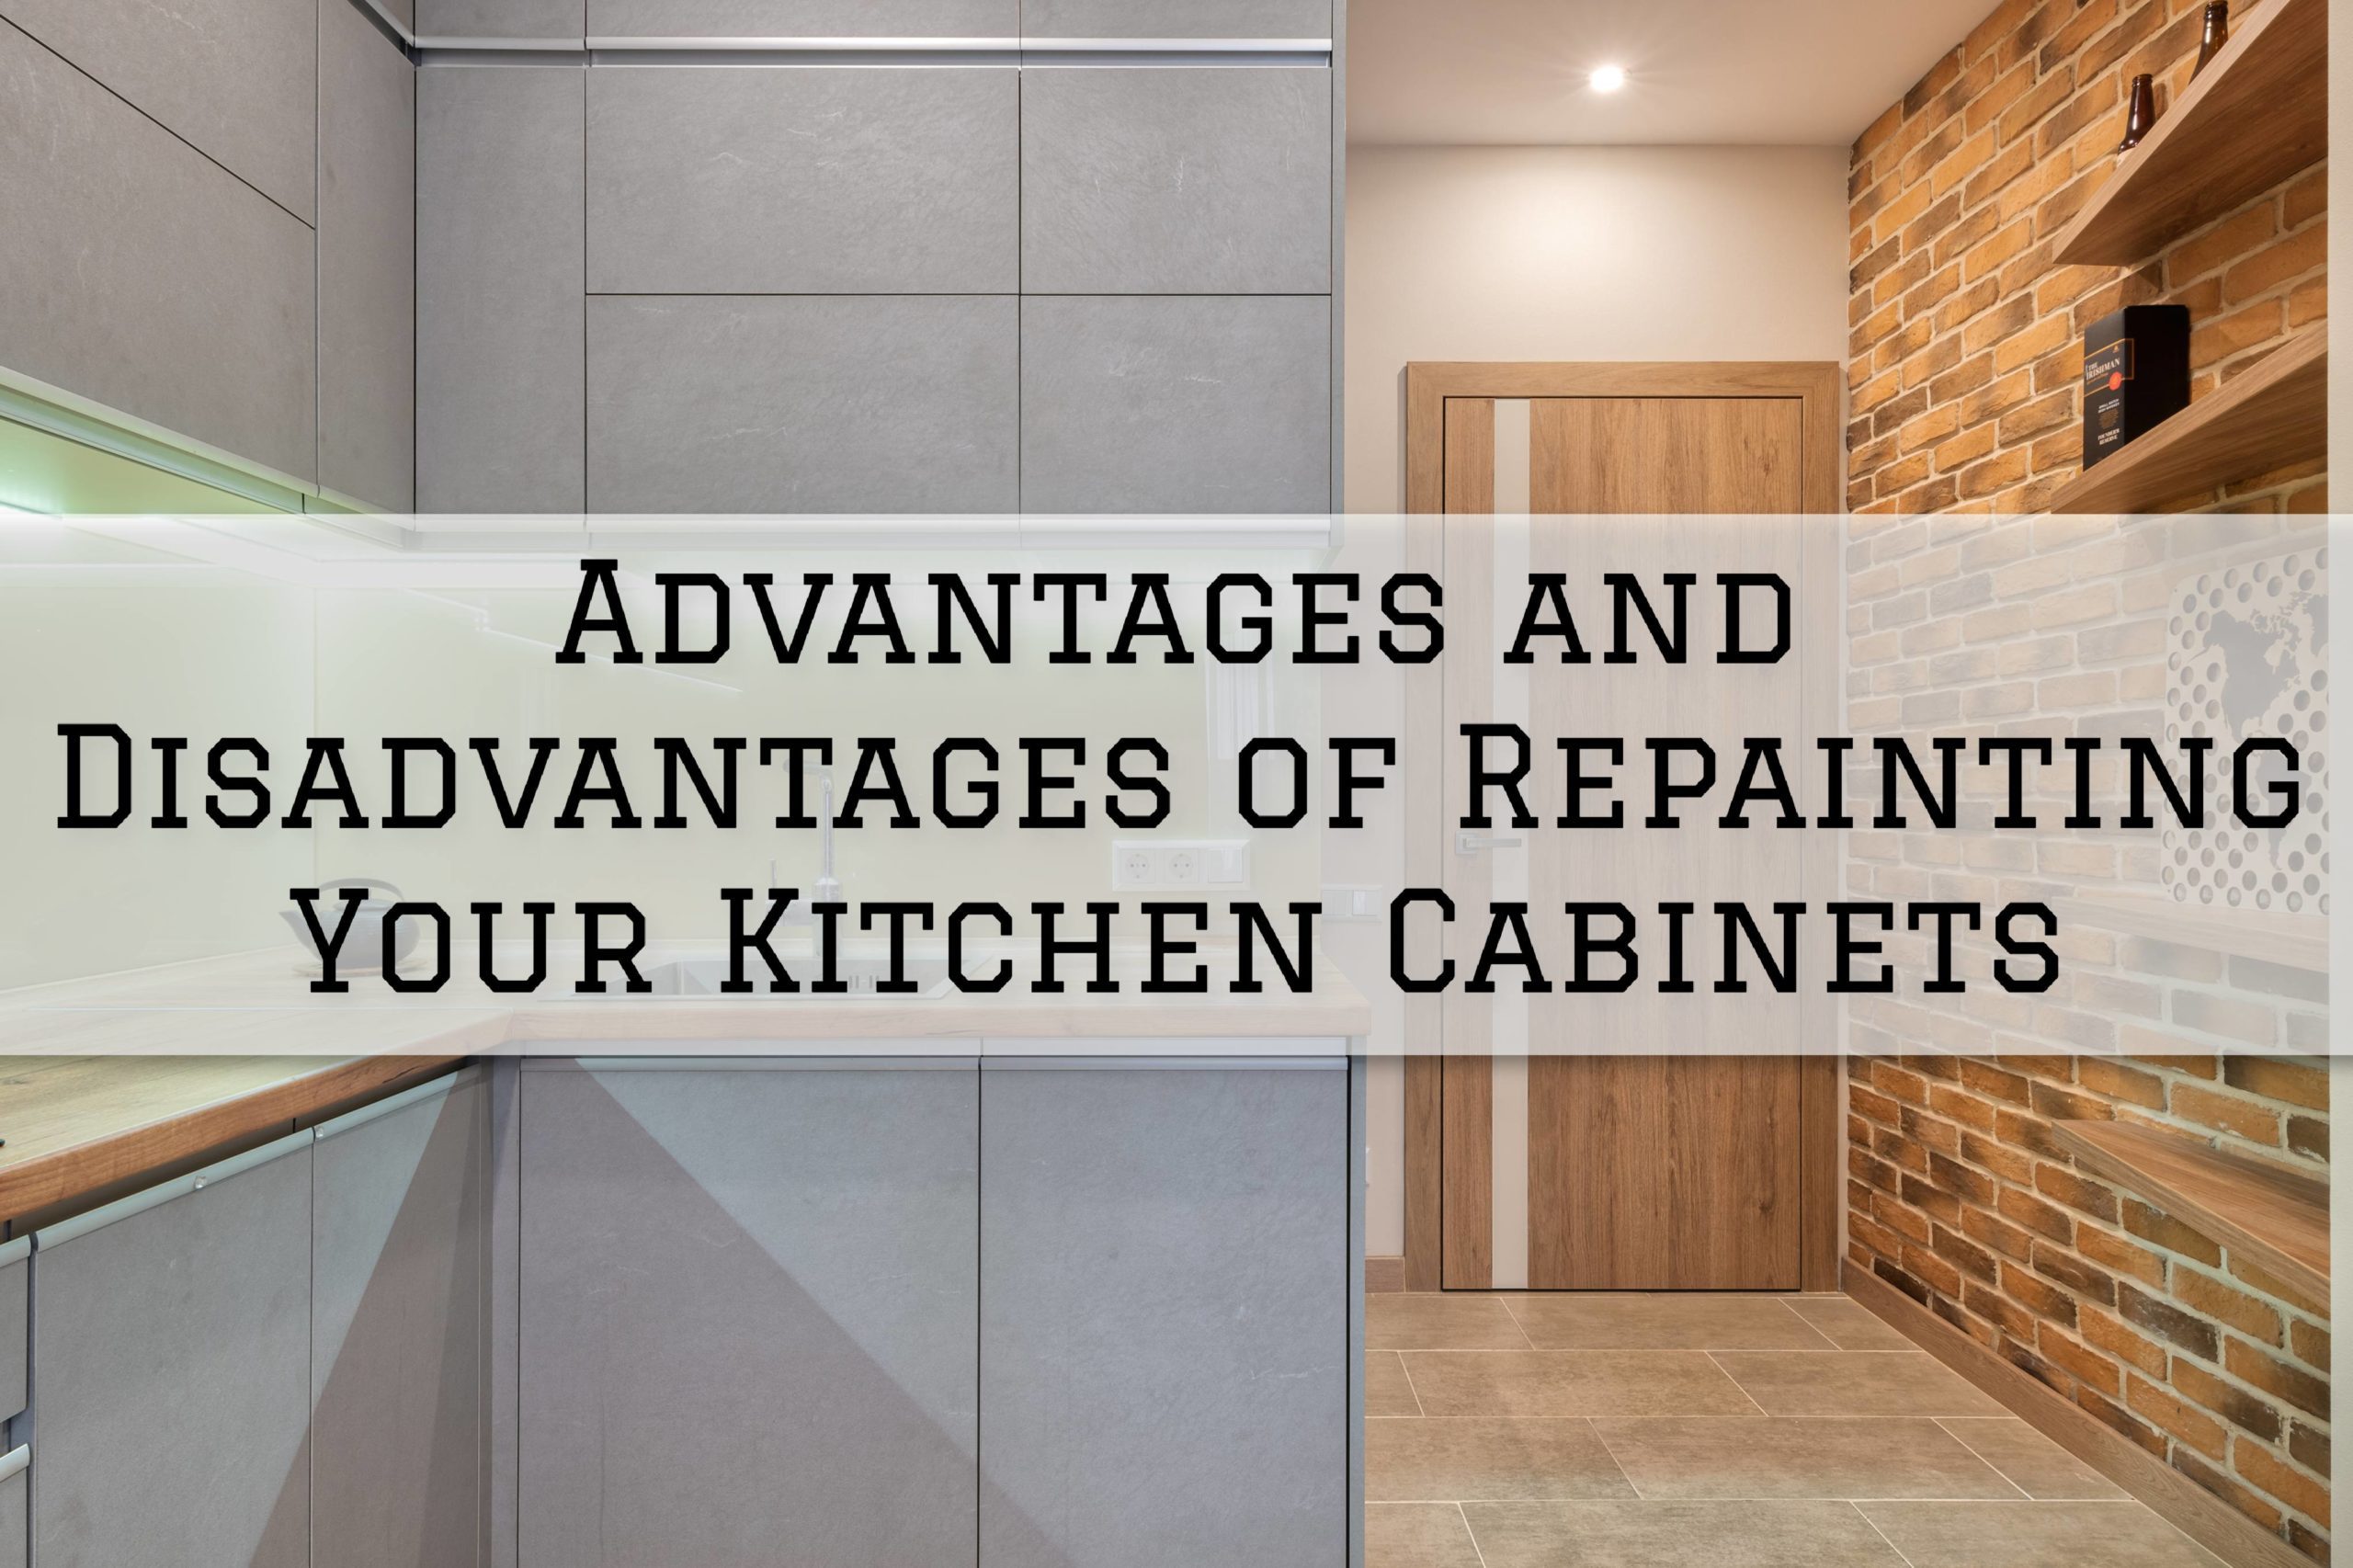 2022 04 13 Prime Painting Phoenix AZ Advantages And Disadvantages Of Repainting Your Kitchen Cabinet Scaled 1 